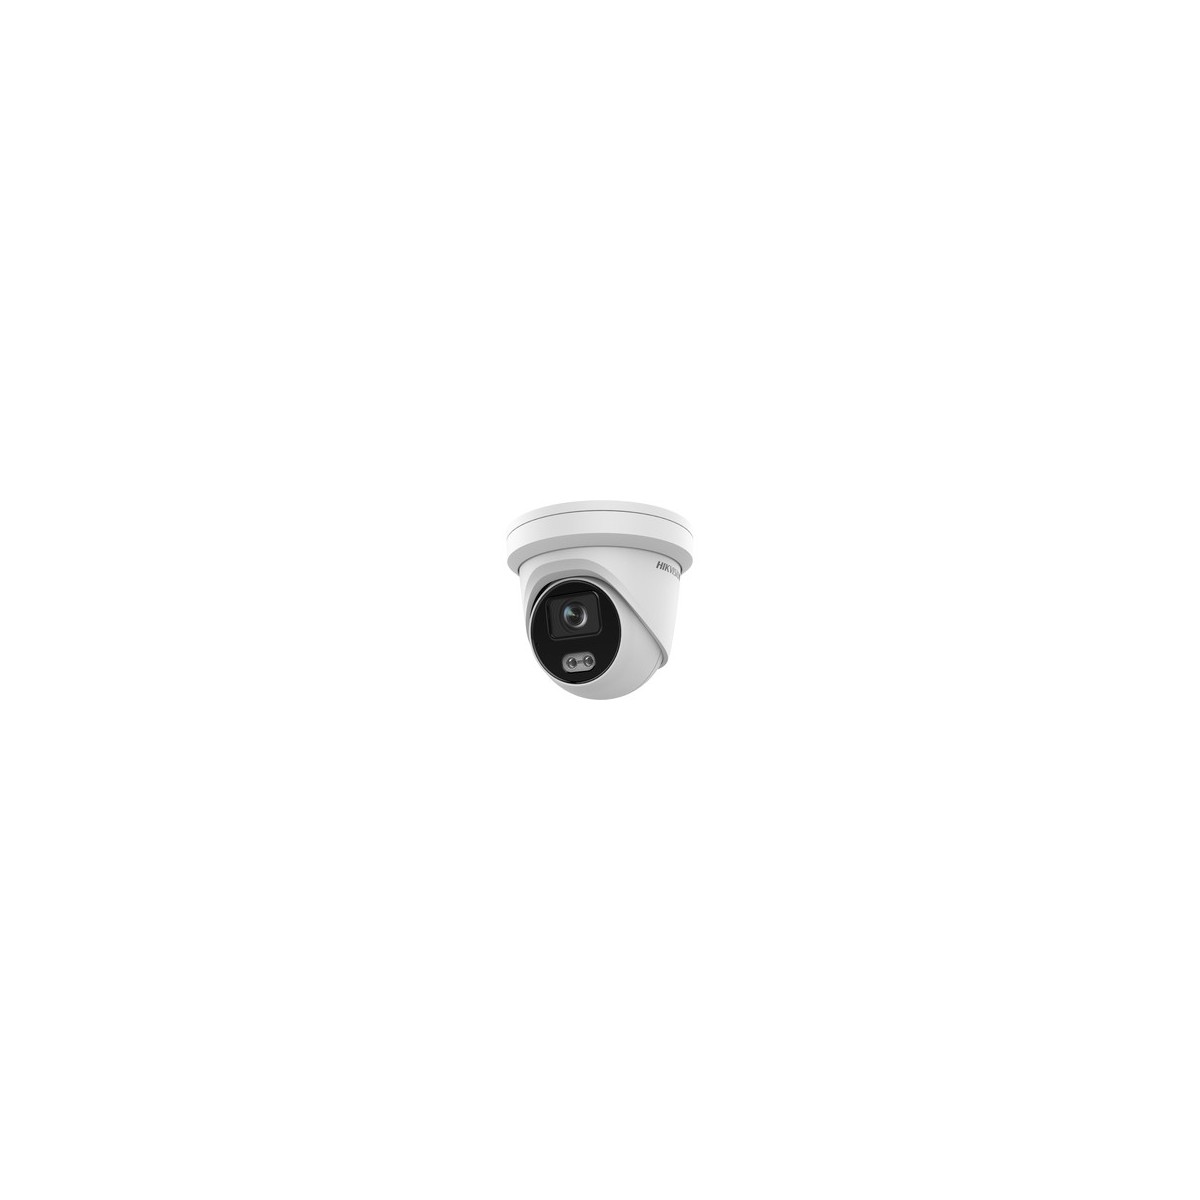 Hikvision Digital Technology DS-2CD2327G2-LU(2.8MM) - IP security camera - Outdoor - Wired - Multi - Class B FCC SDoC (47 CFR Pa